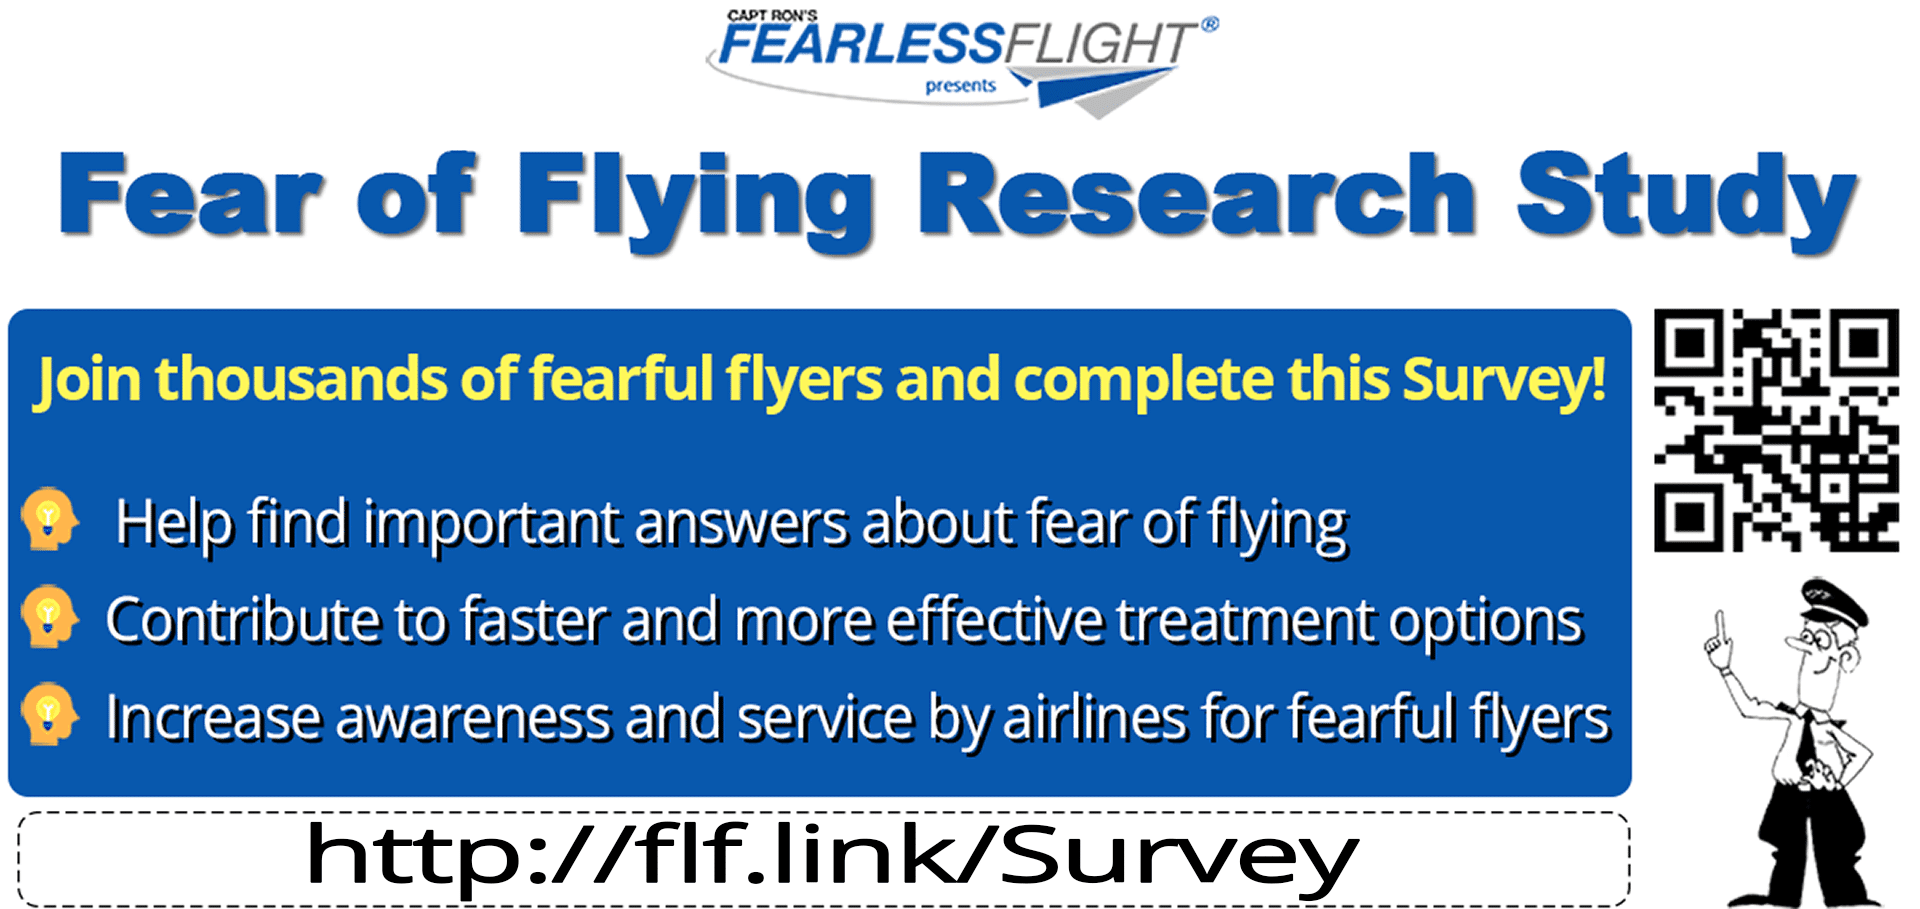 World's largest Fear of Flying Research Study